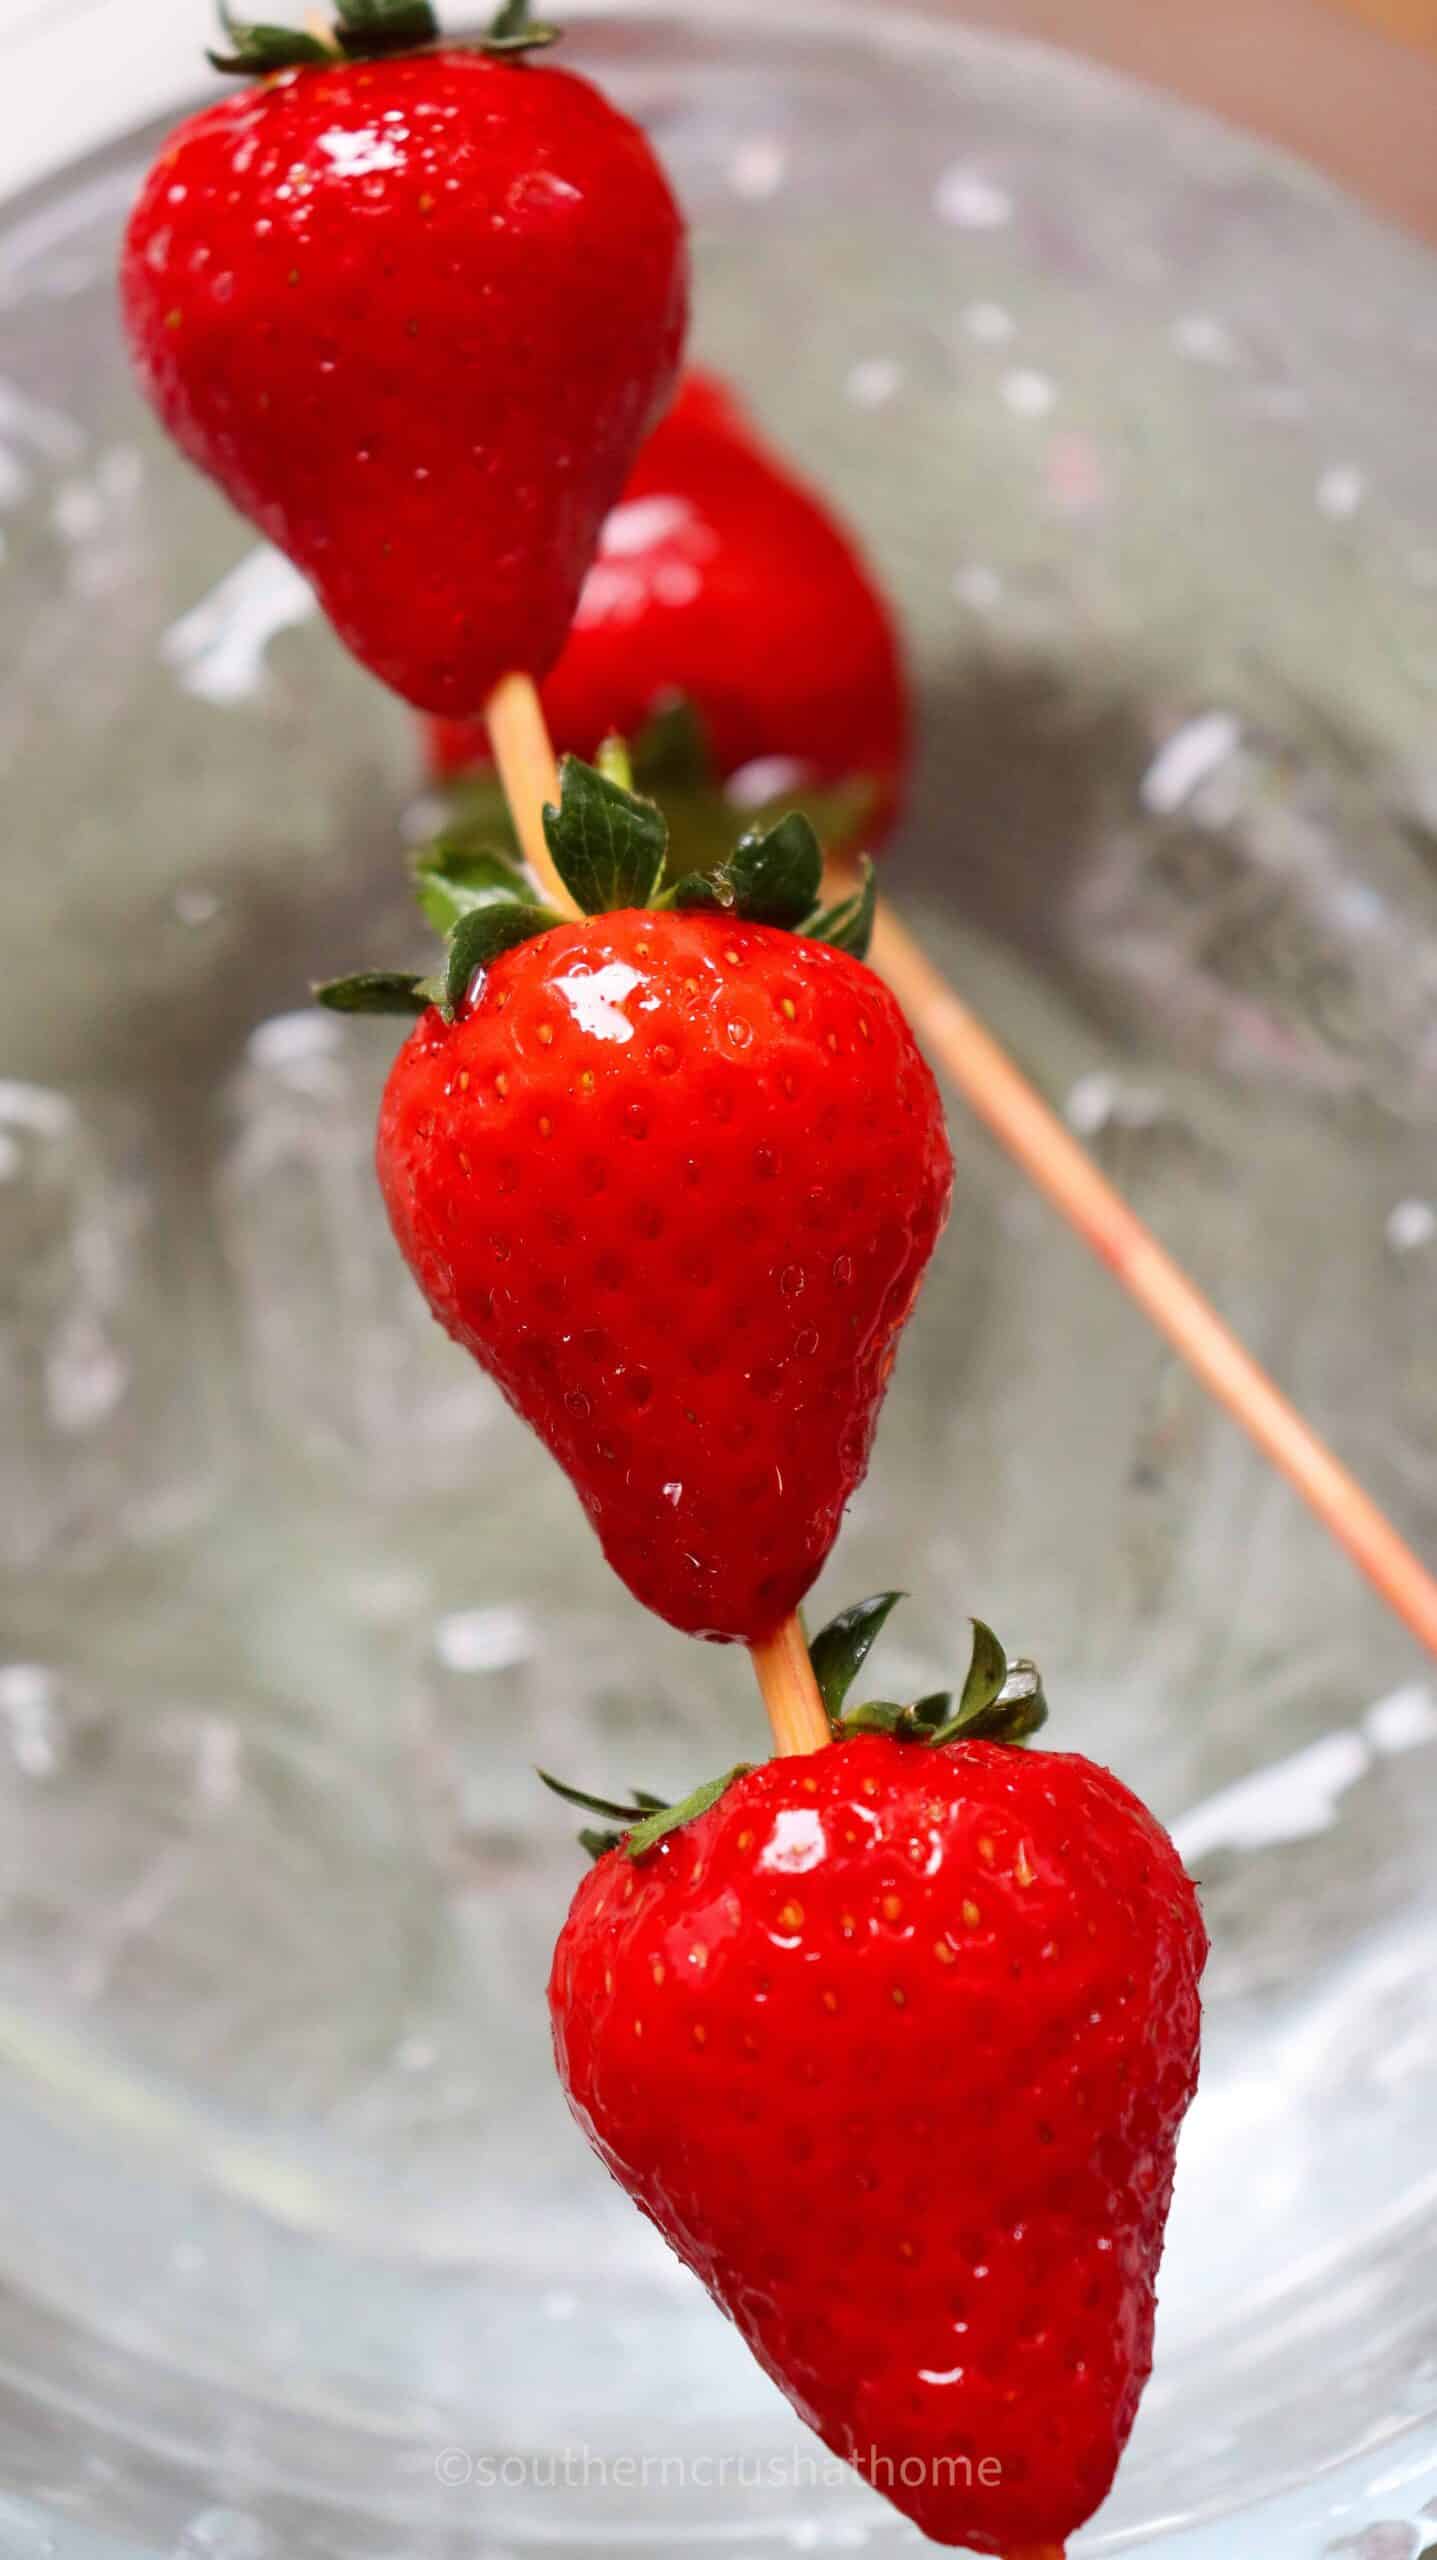 up close view of coated strawberries after dipped in ice water bath